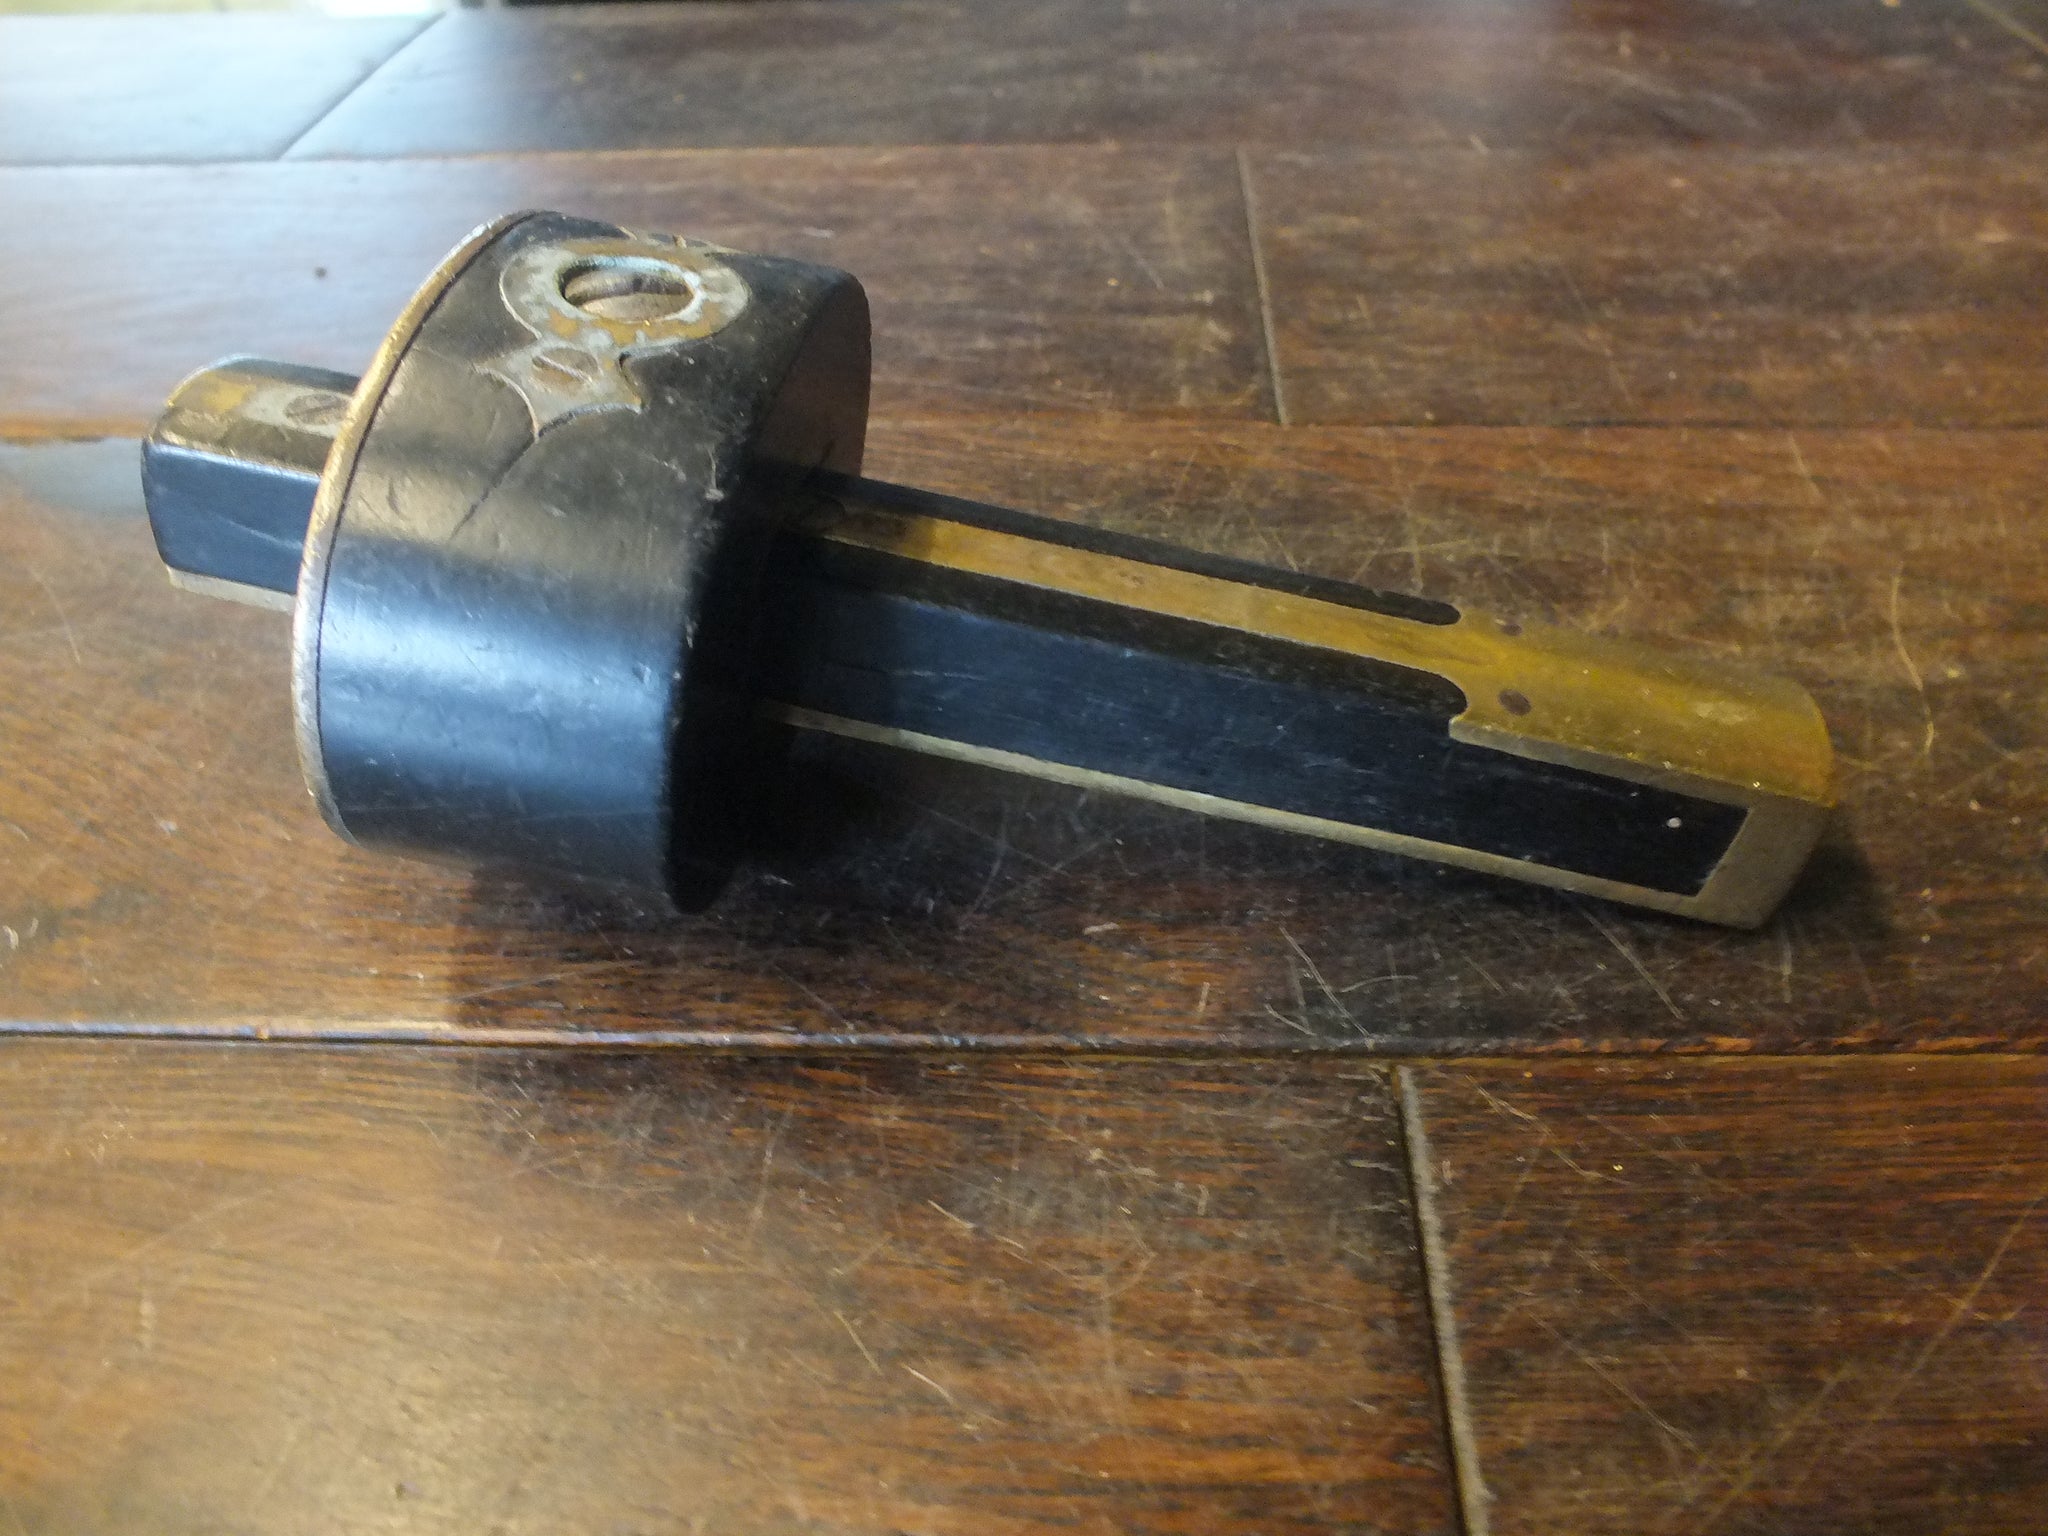 Mortise gauge. Ebony and brass. Good working order. Beautiful instrument. 46323